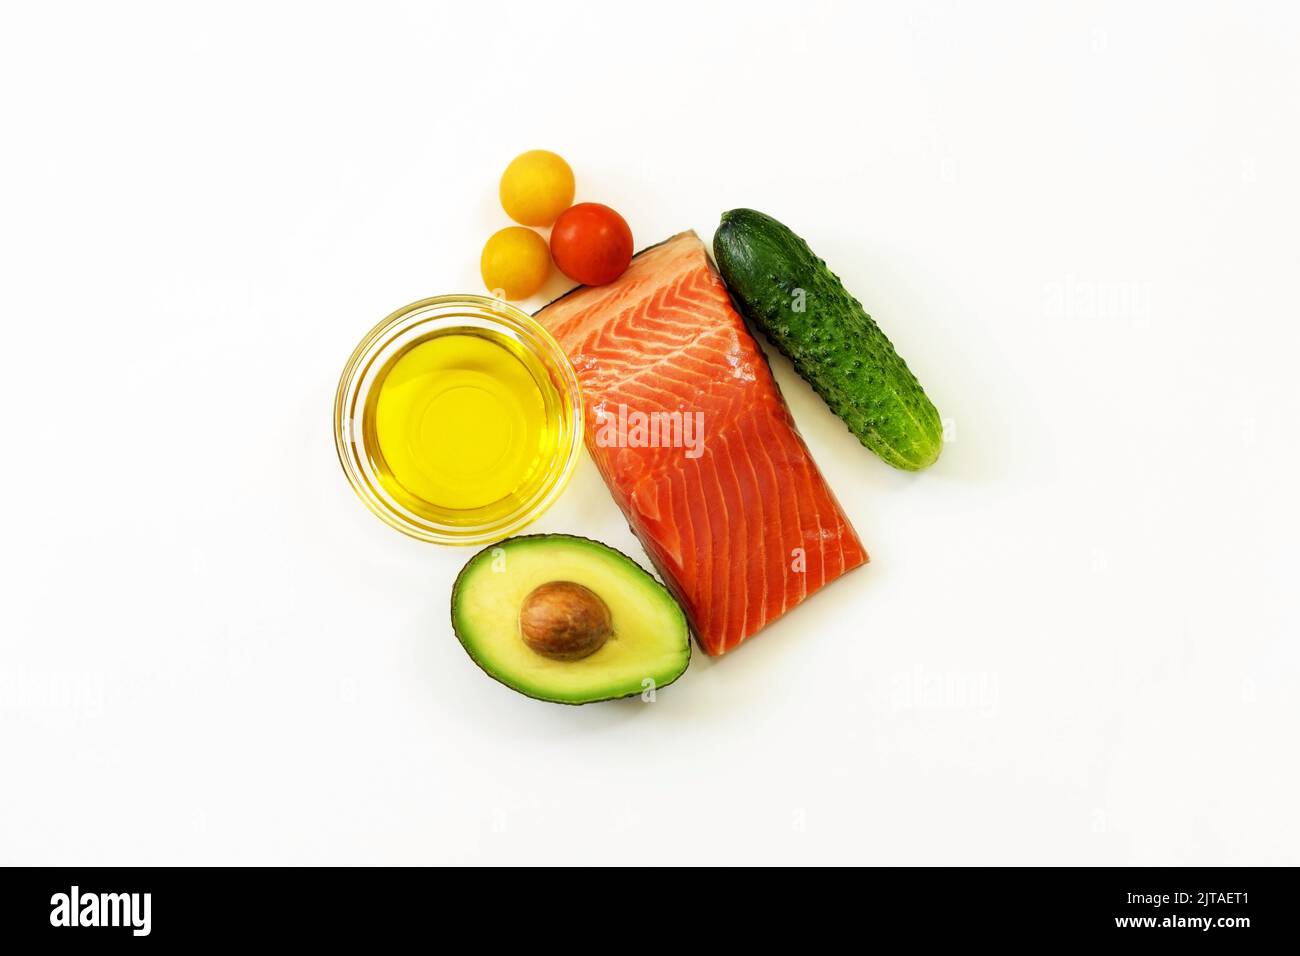 Ingredients of healthy food. Fish, olive oil, cucumber, tomato, avocado. Ketogenic low carbs diet concept. Stock Photo